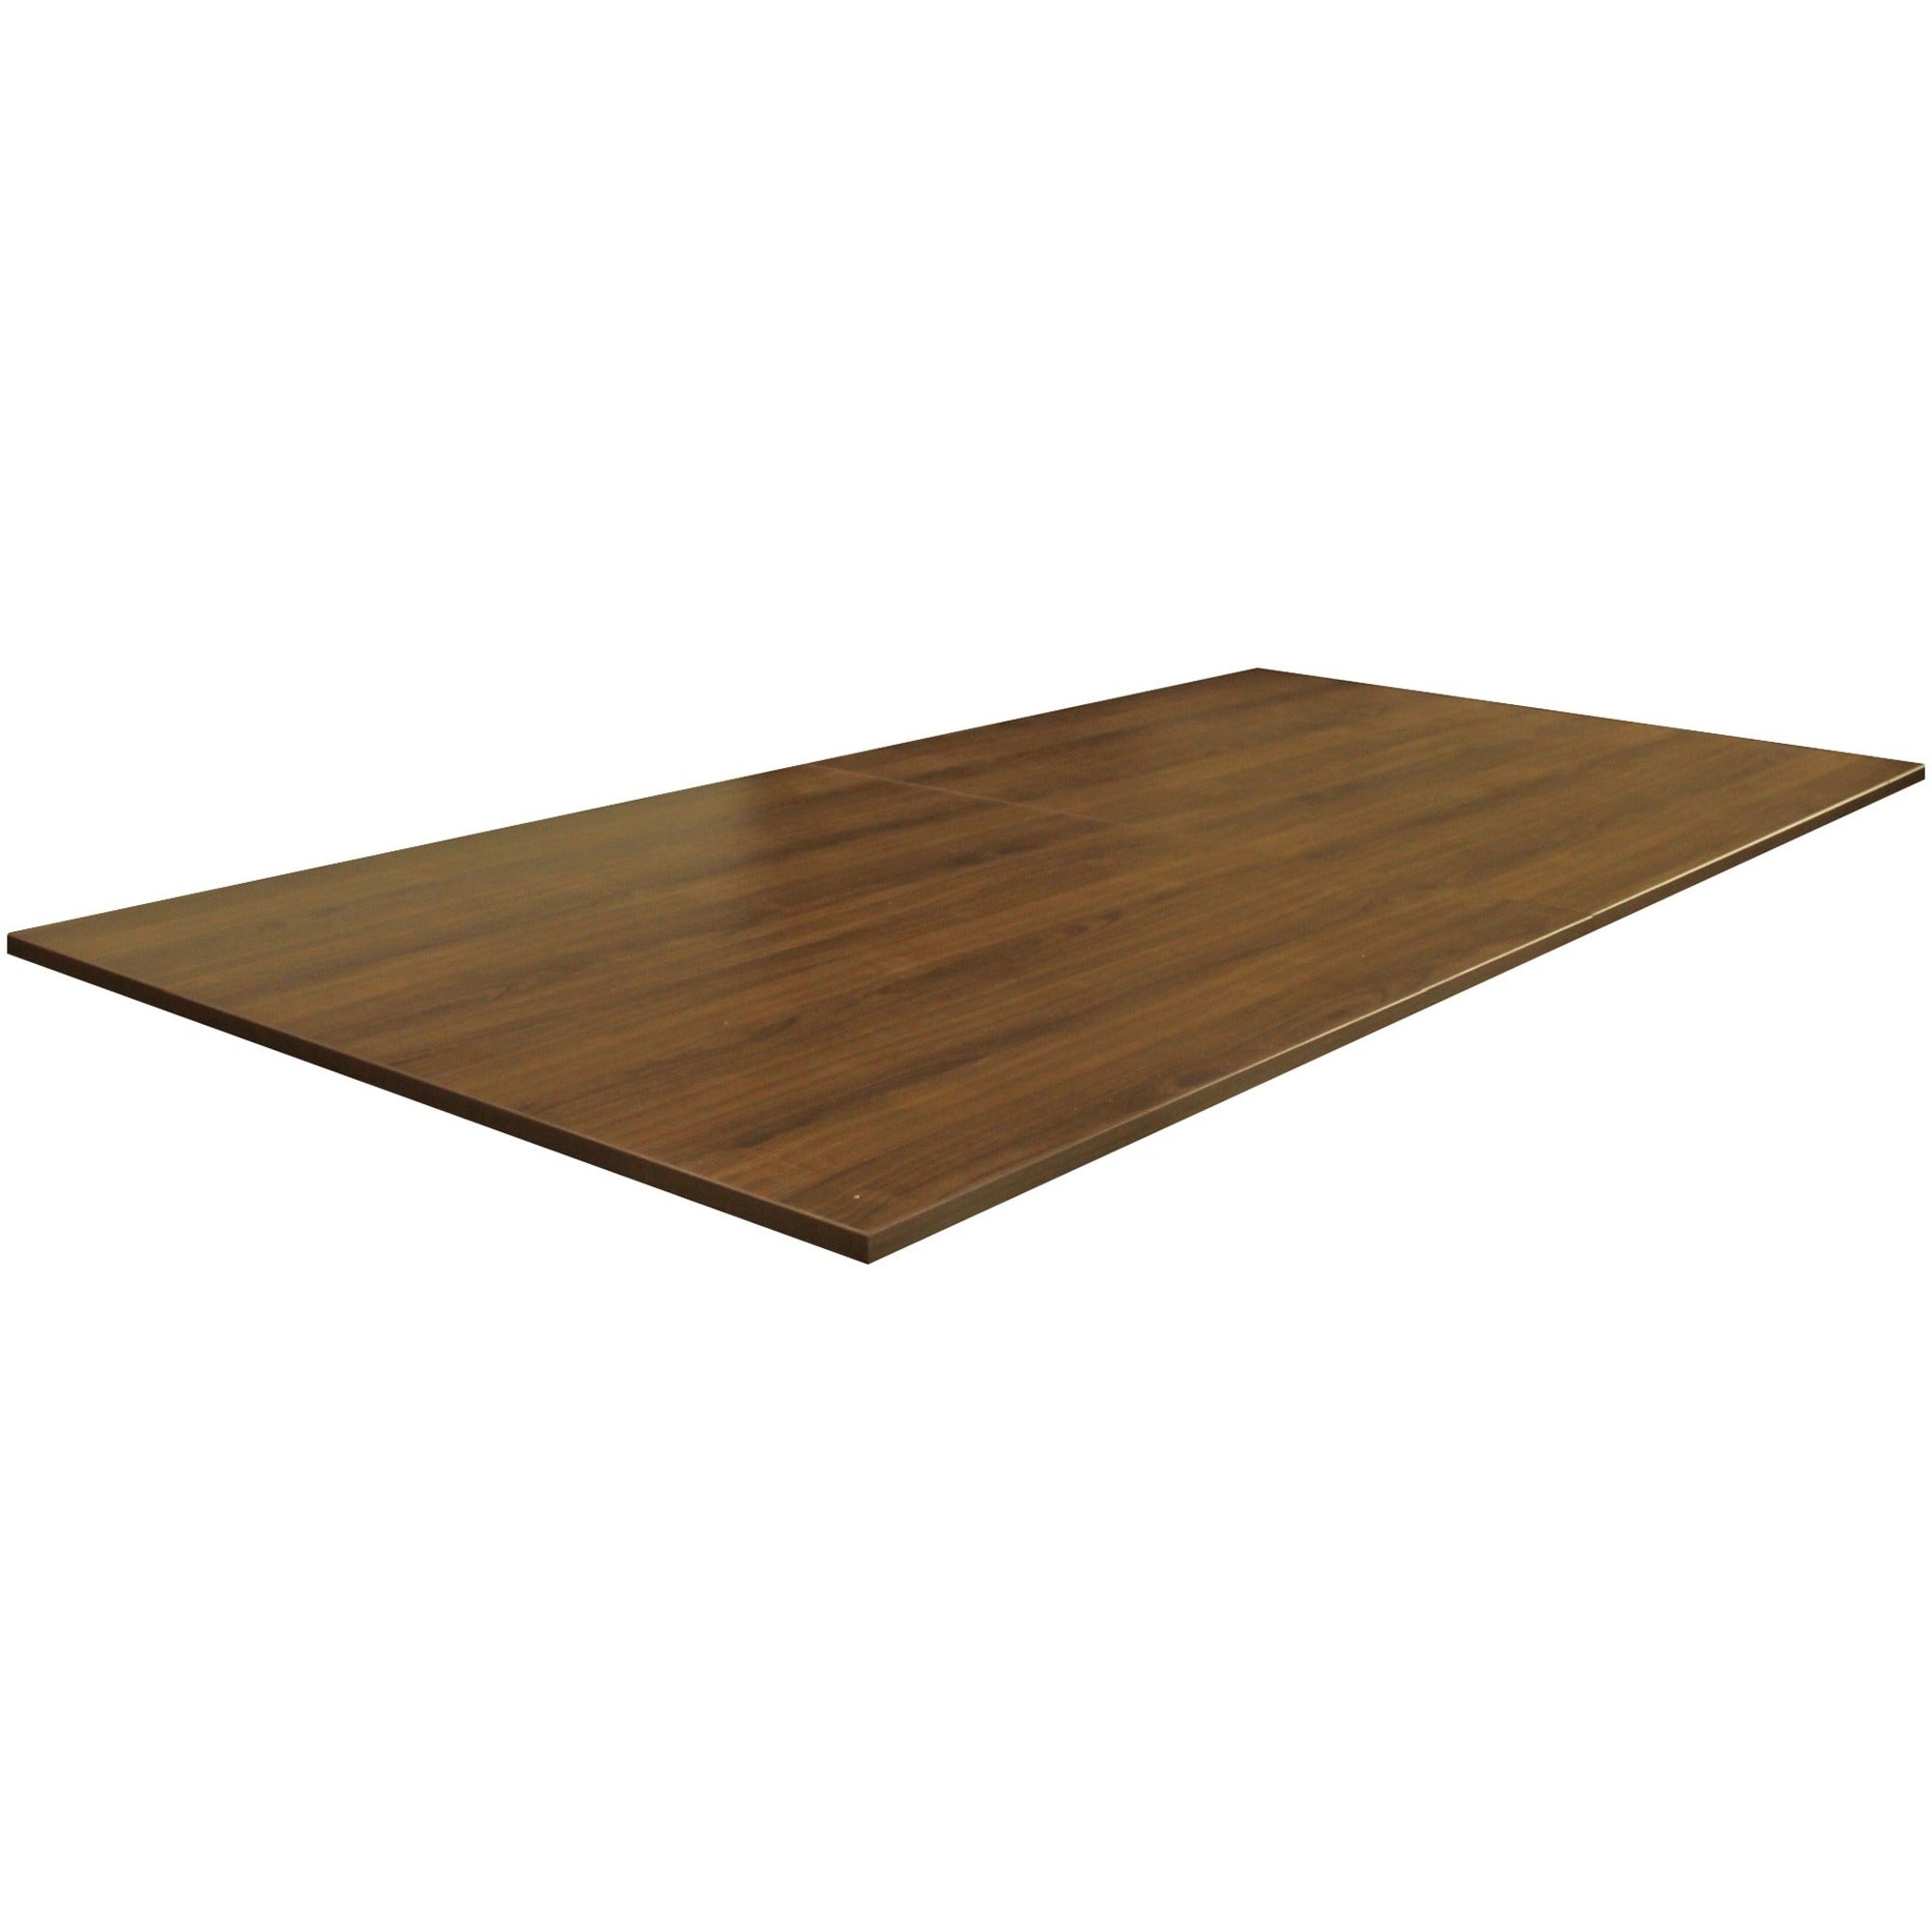 Lorell Essentials Rectangular Conference Tabletop - For - Table TopRectangle Top x 94.50" Table Top Width x 47.25" Table Top Depth - 1" Height - Assembly Required - Walnut - P2 Particleboard - 1 Each - 